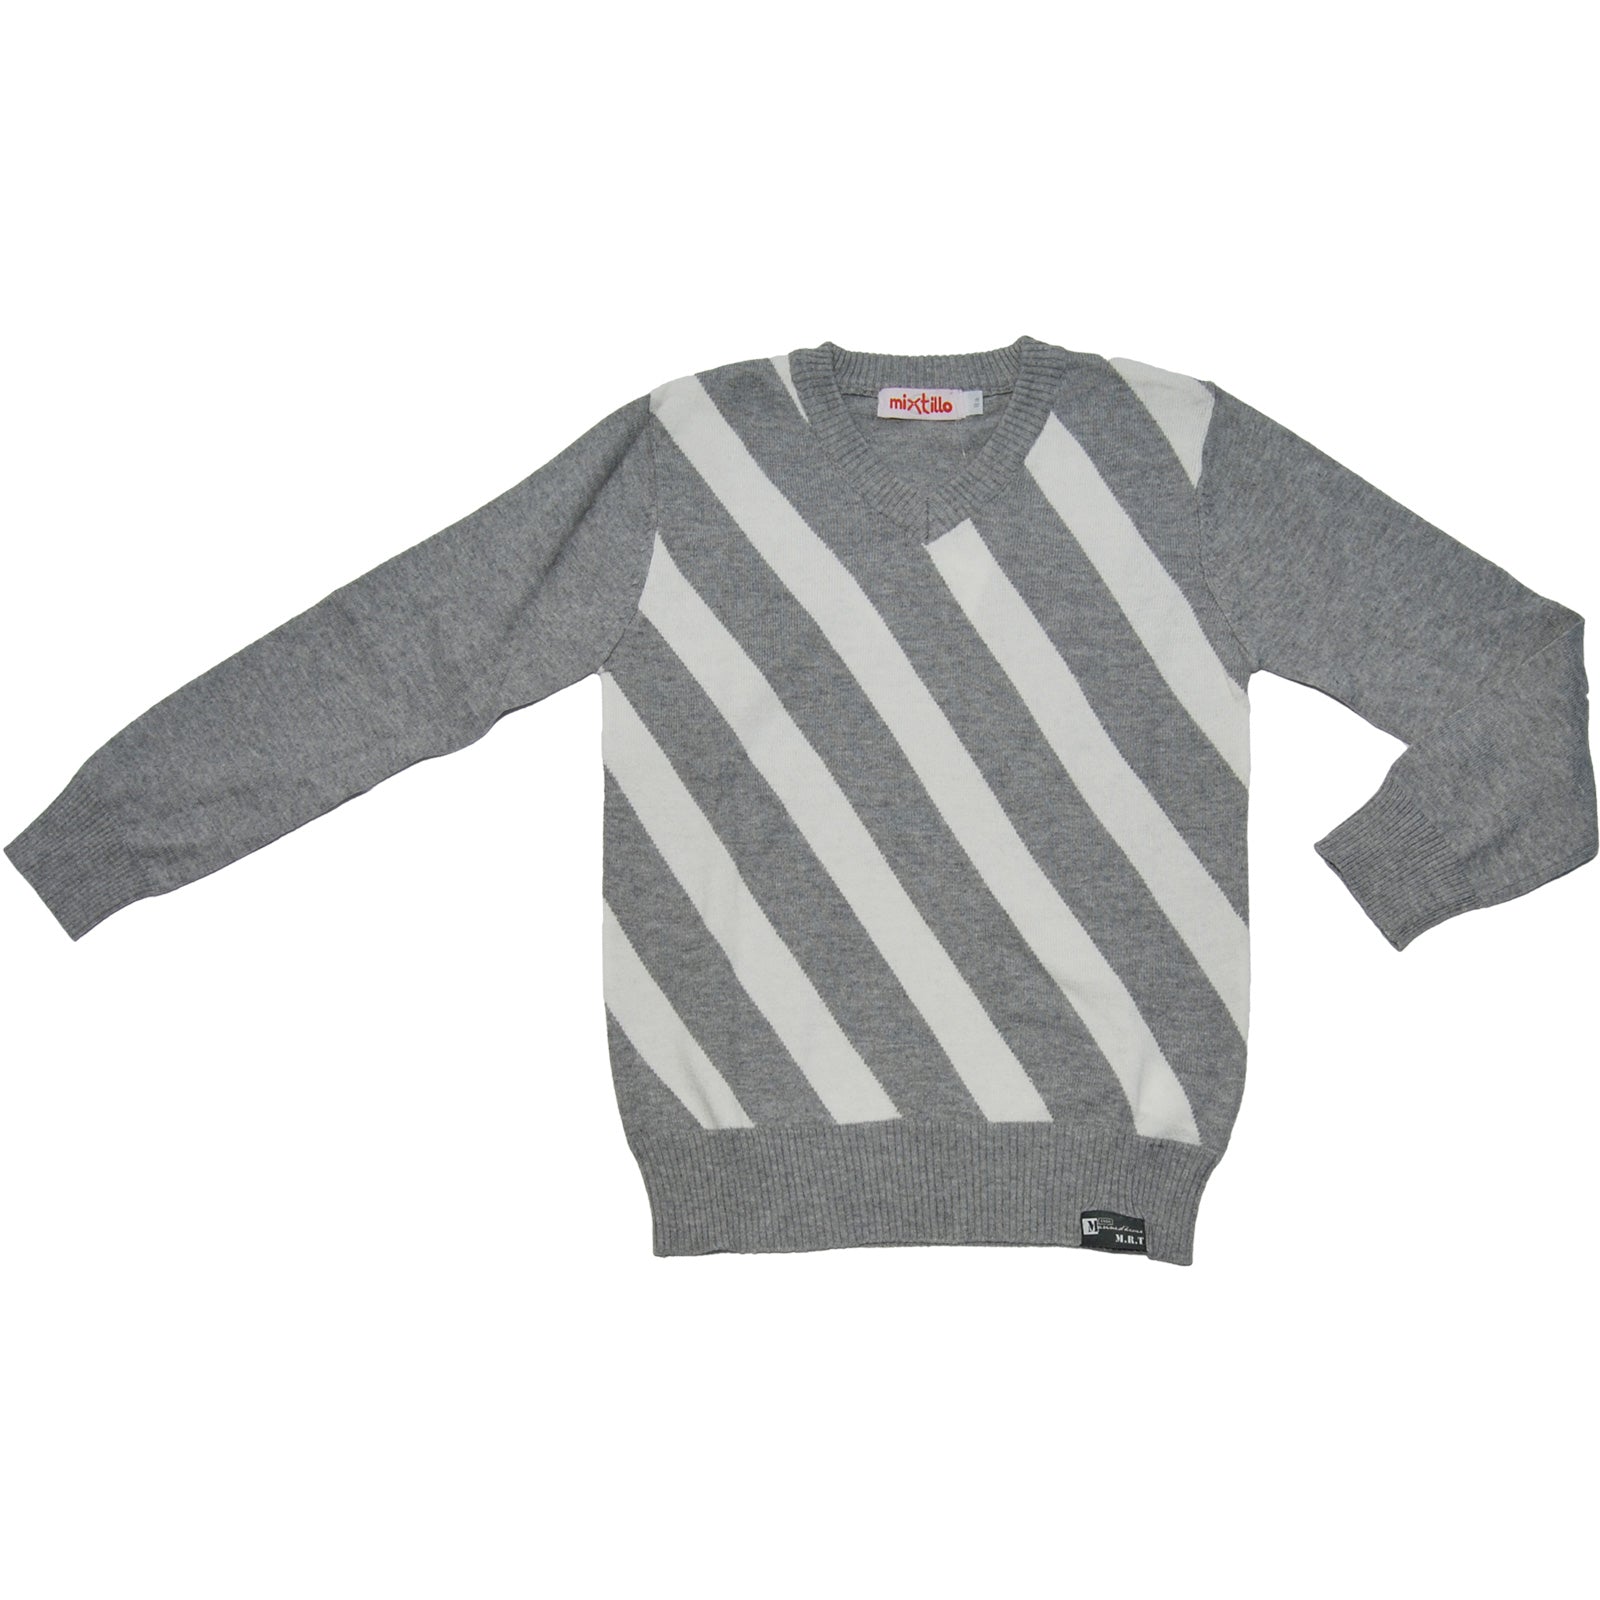 
  V-neck sweater of the children's clothing line Mirtillo, with fancy front
  diagonally striped...